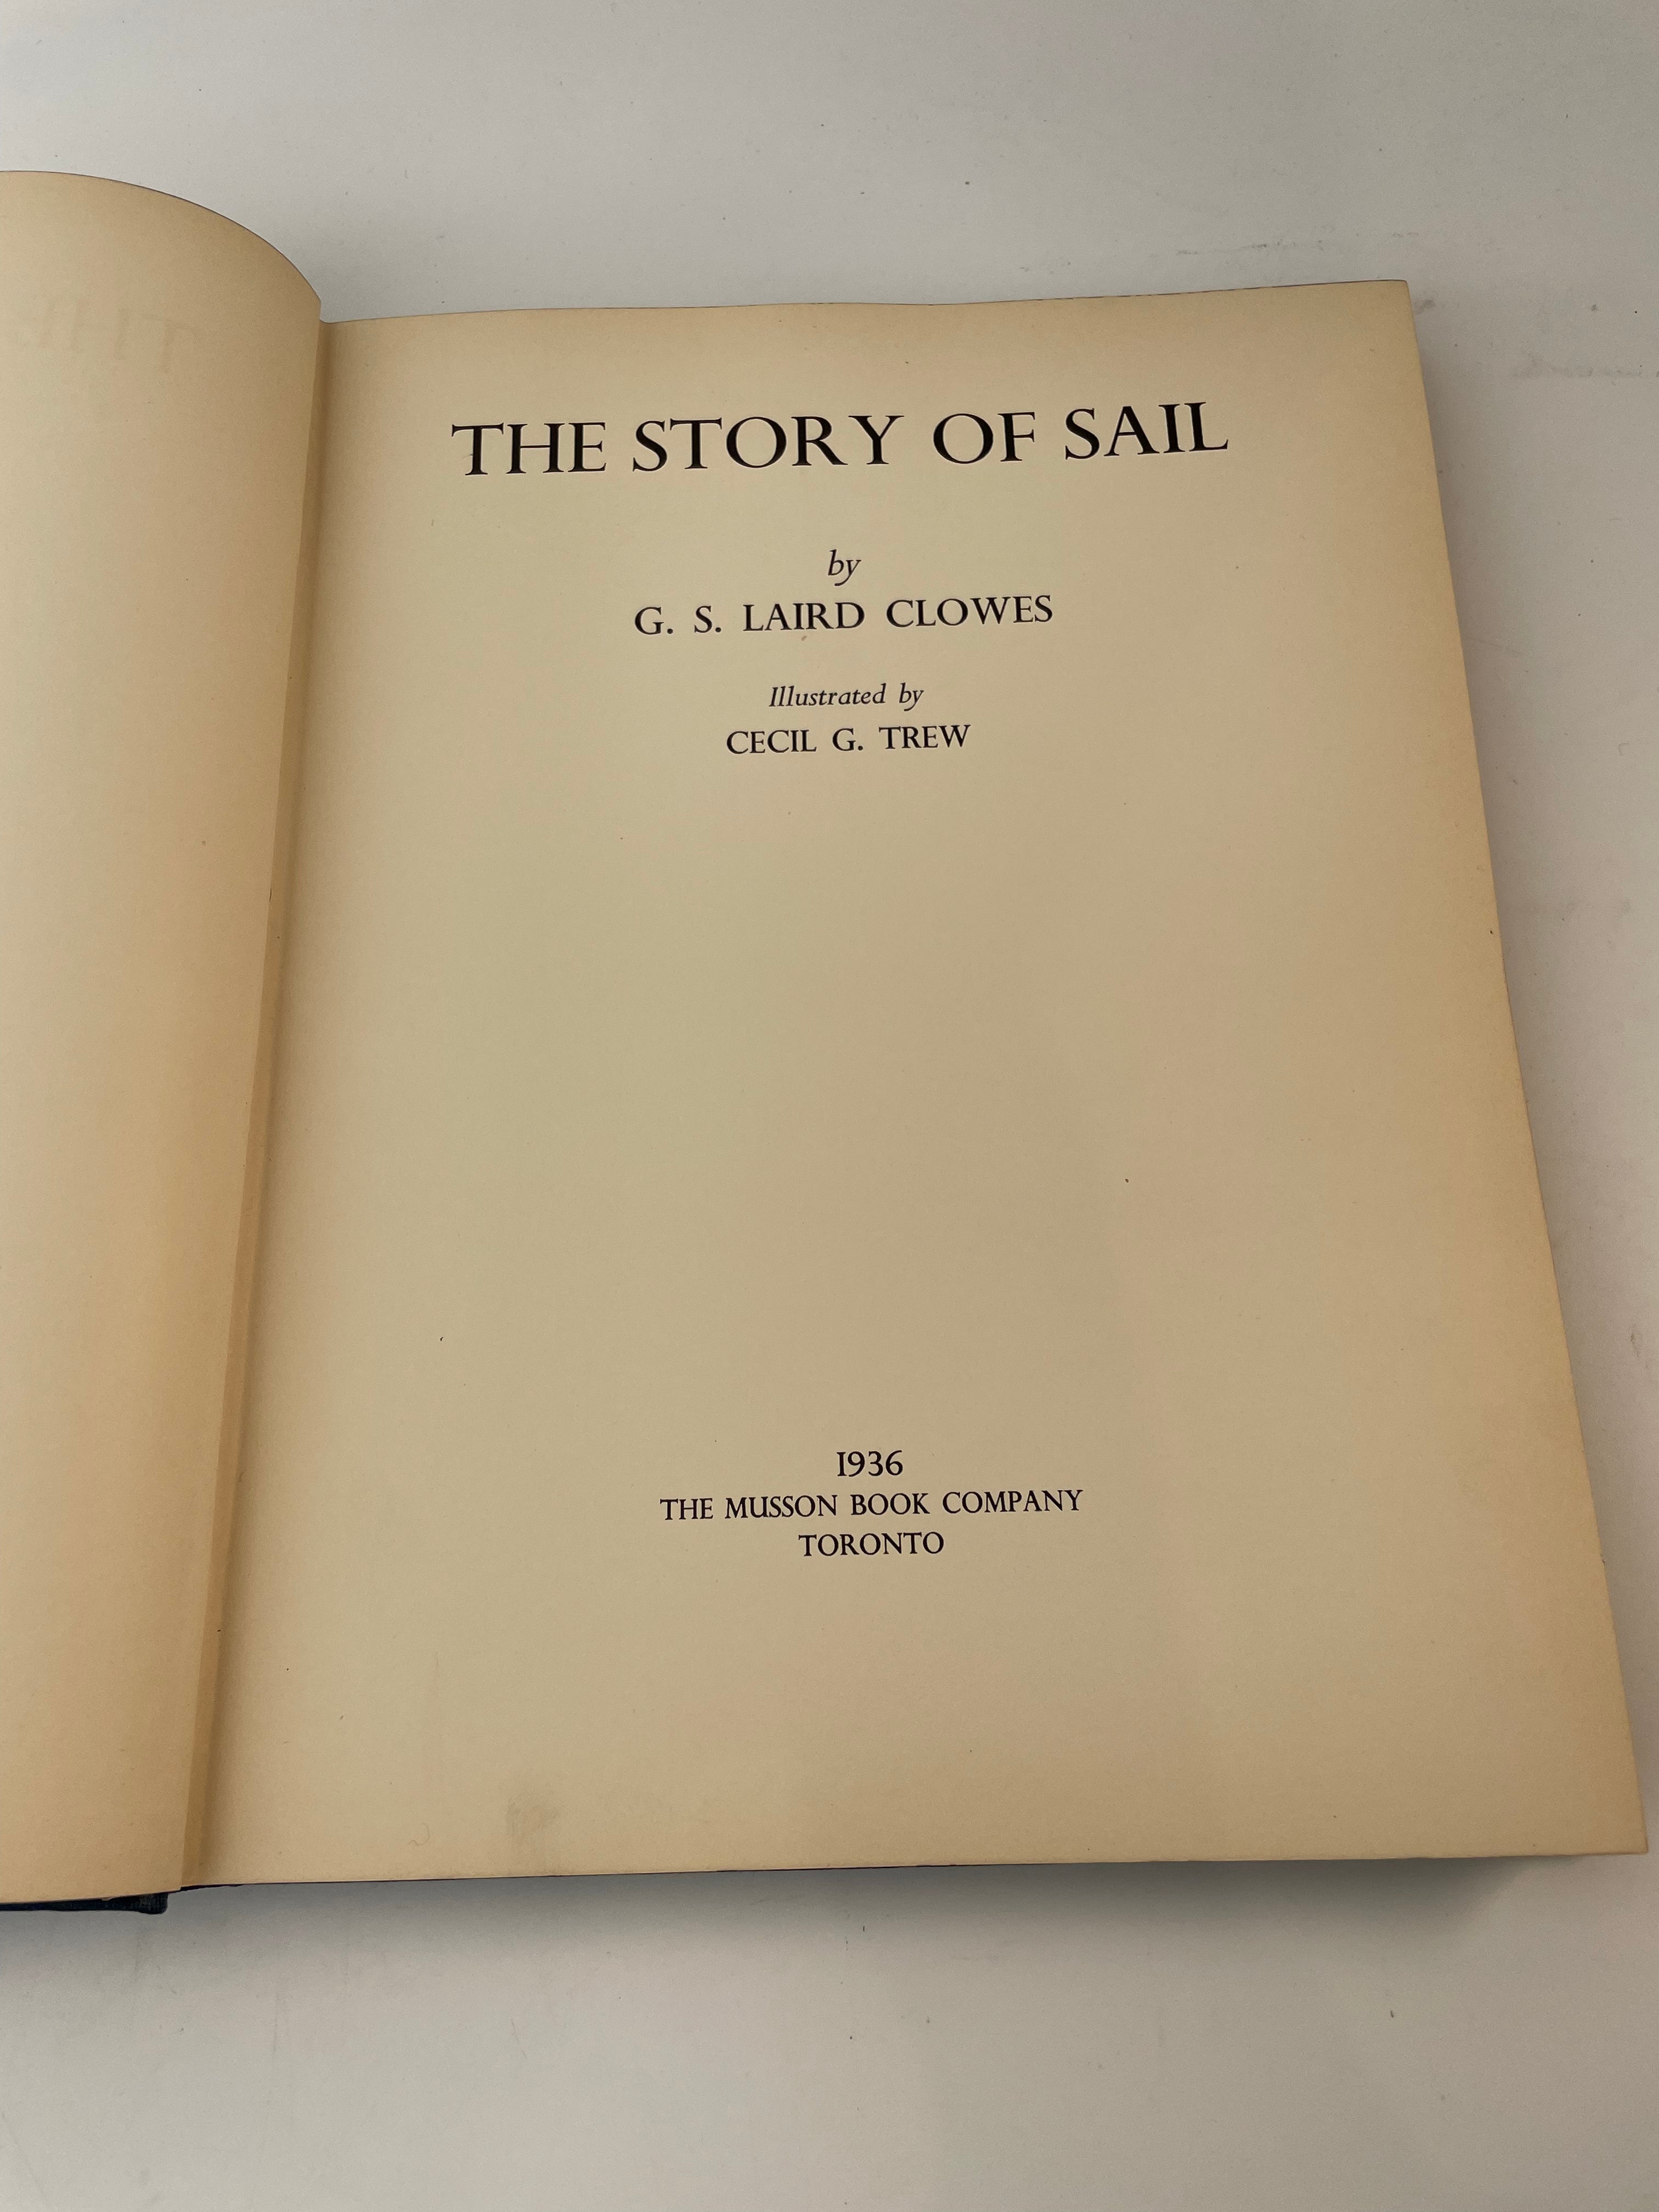 The Story of Sail by G.S. Laird Clowes & Cecil Trew